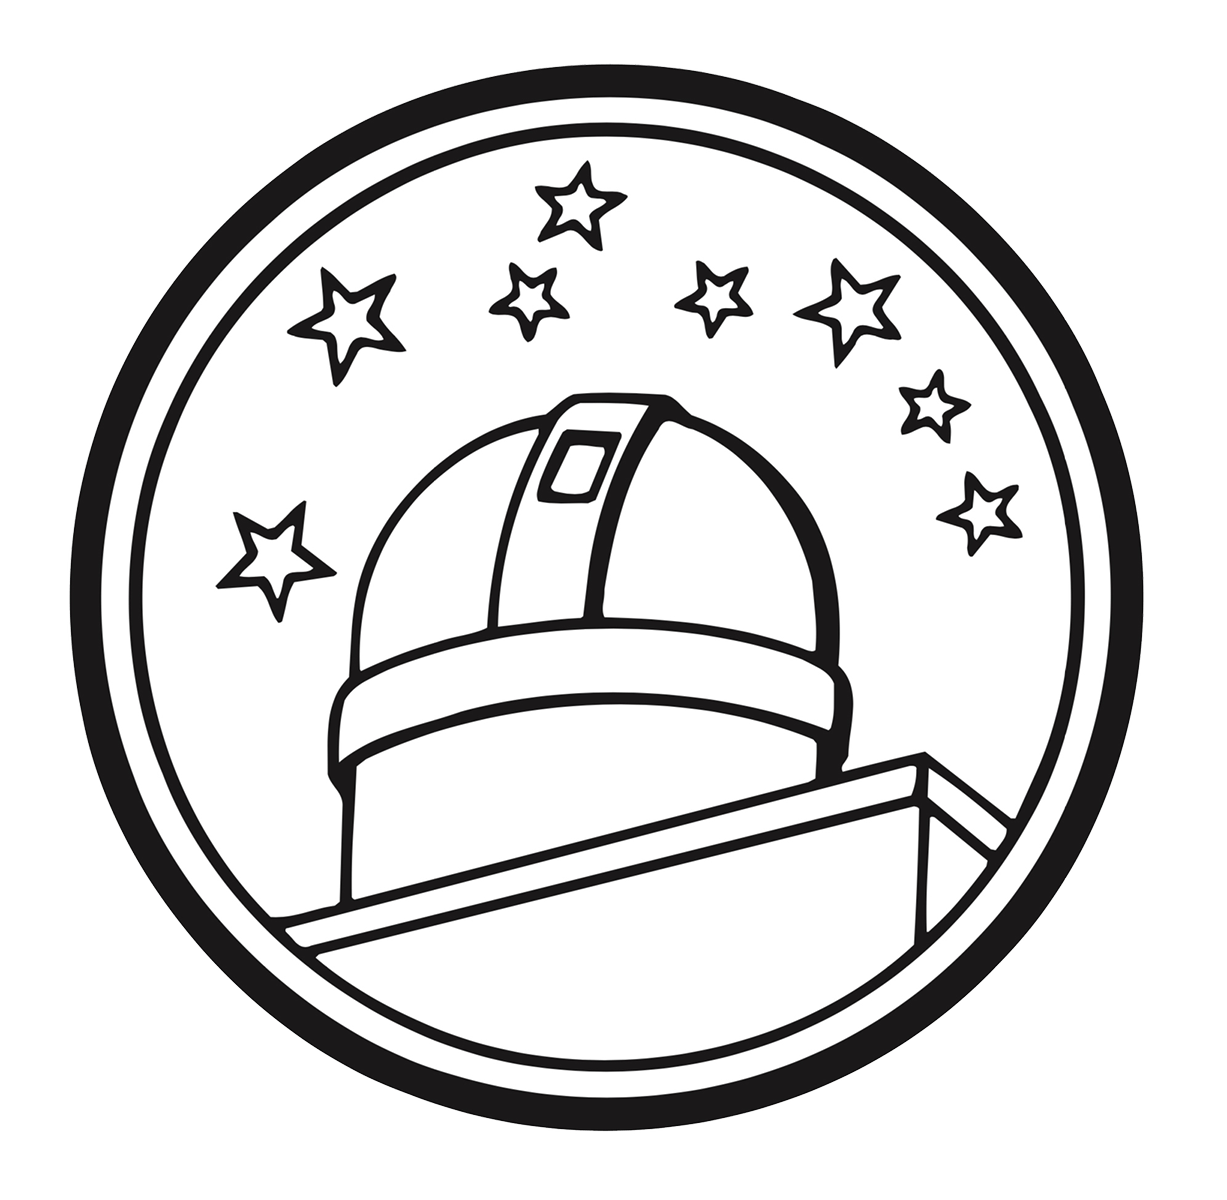 The Constellation insignia depicted on the cupola of the Geneva Observatory